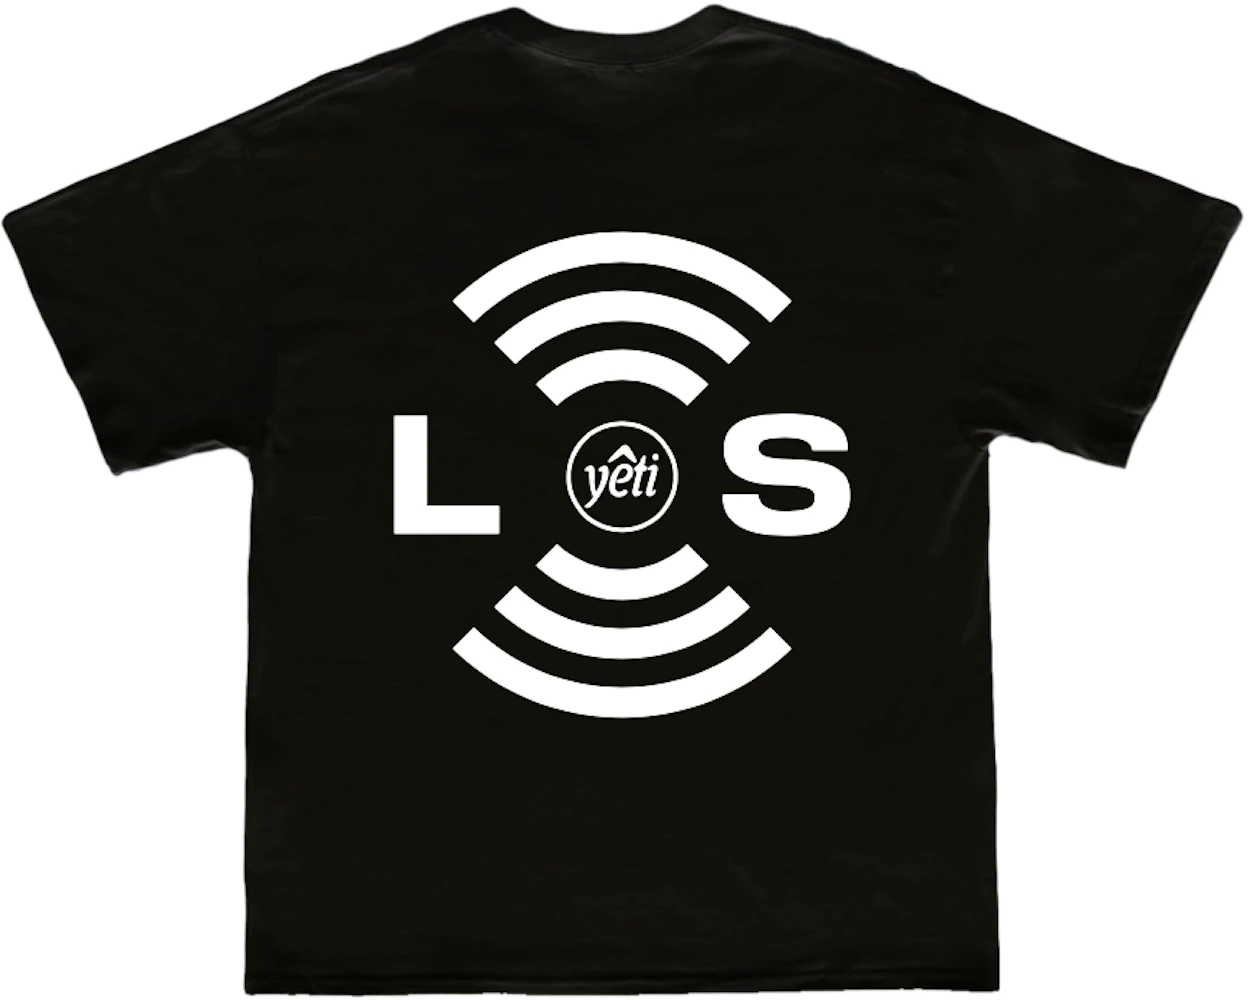 Yeti Out Lost Signal Logo Tee Black Men's - SS21 - GB